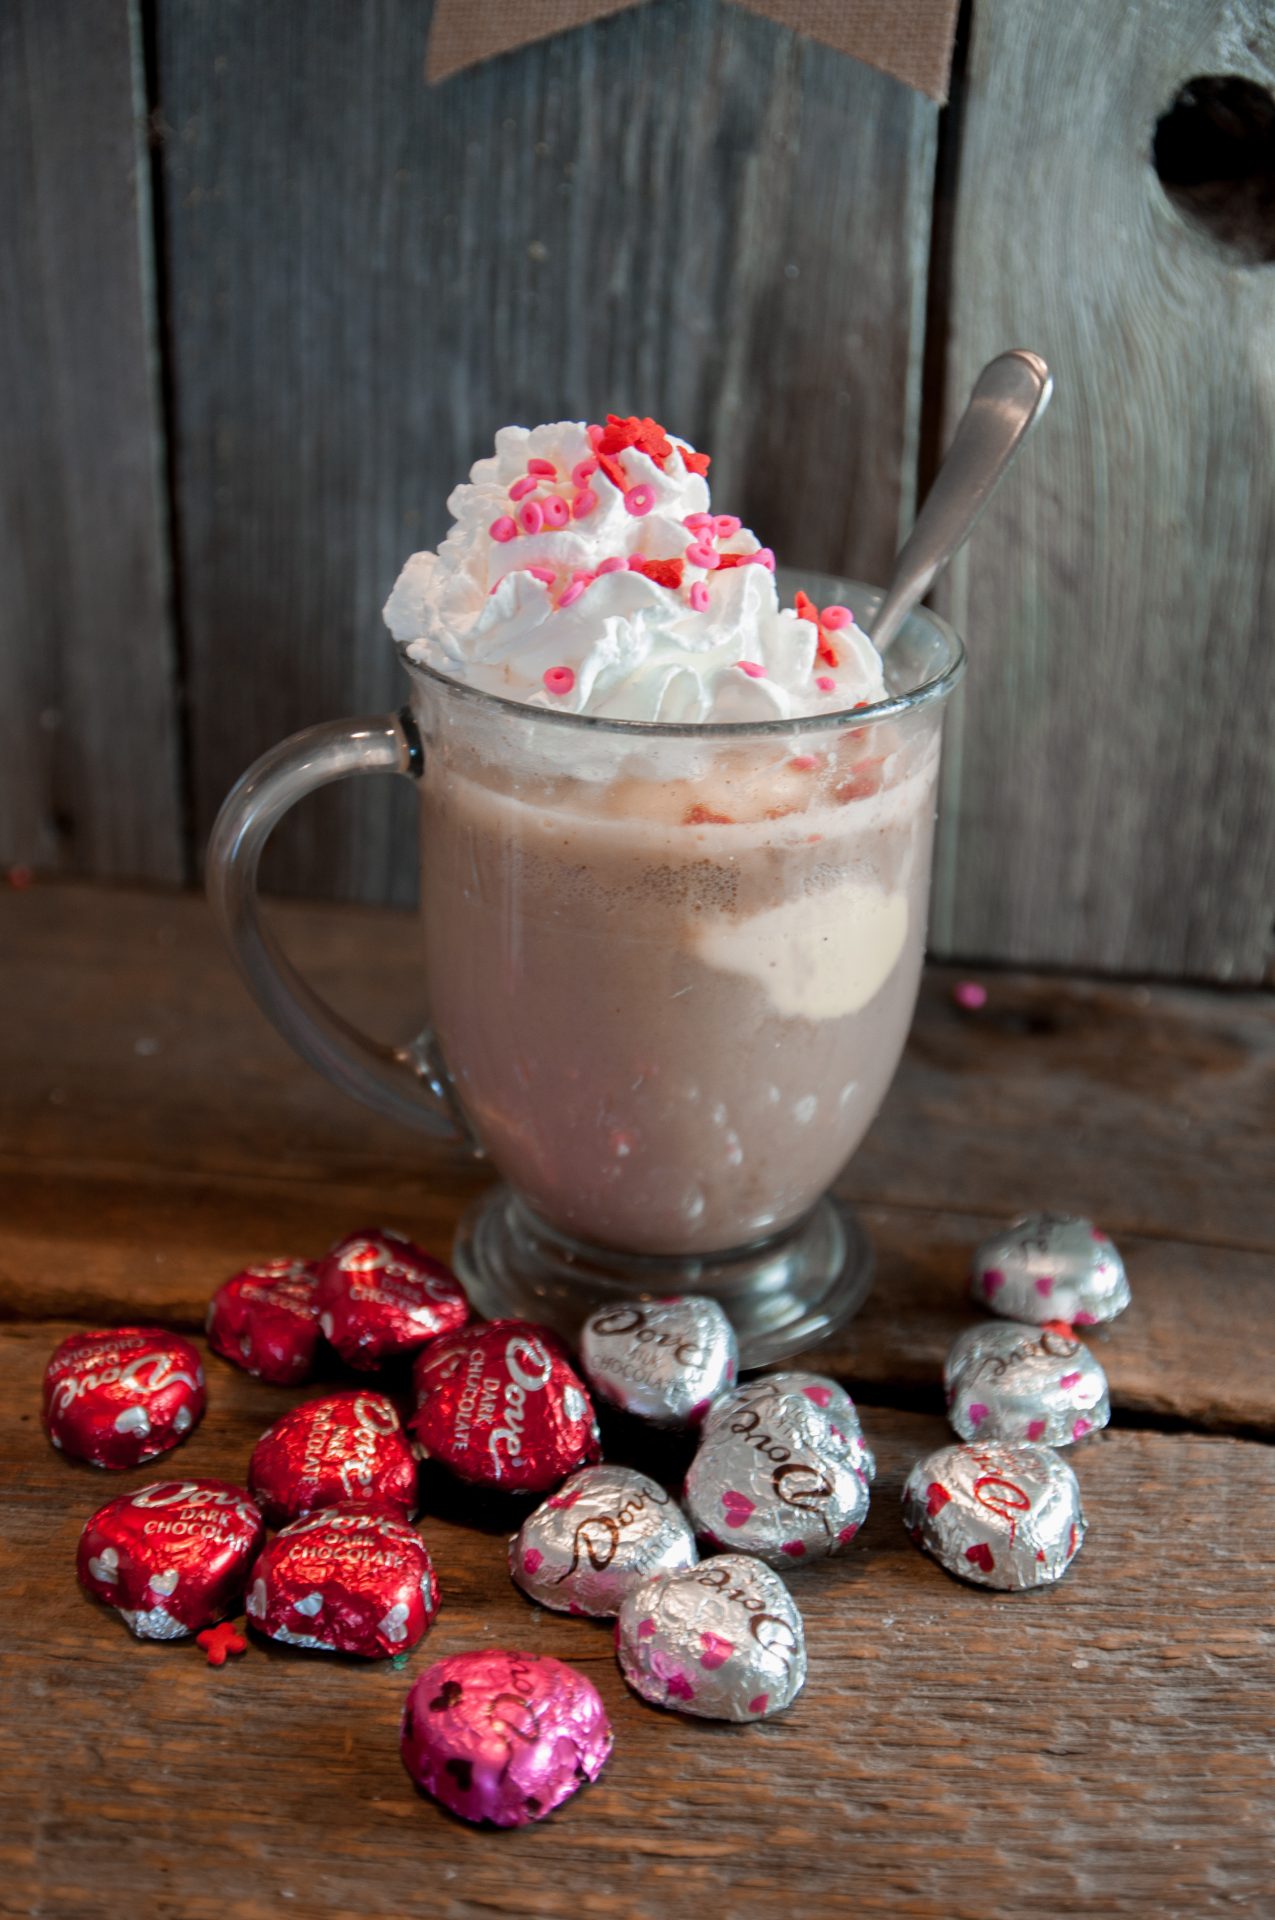 Sweet Valentine Dove Hot Chocolate will win over your love!